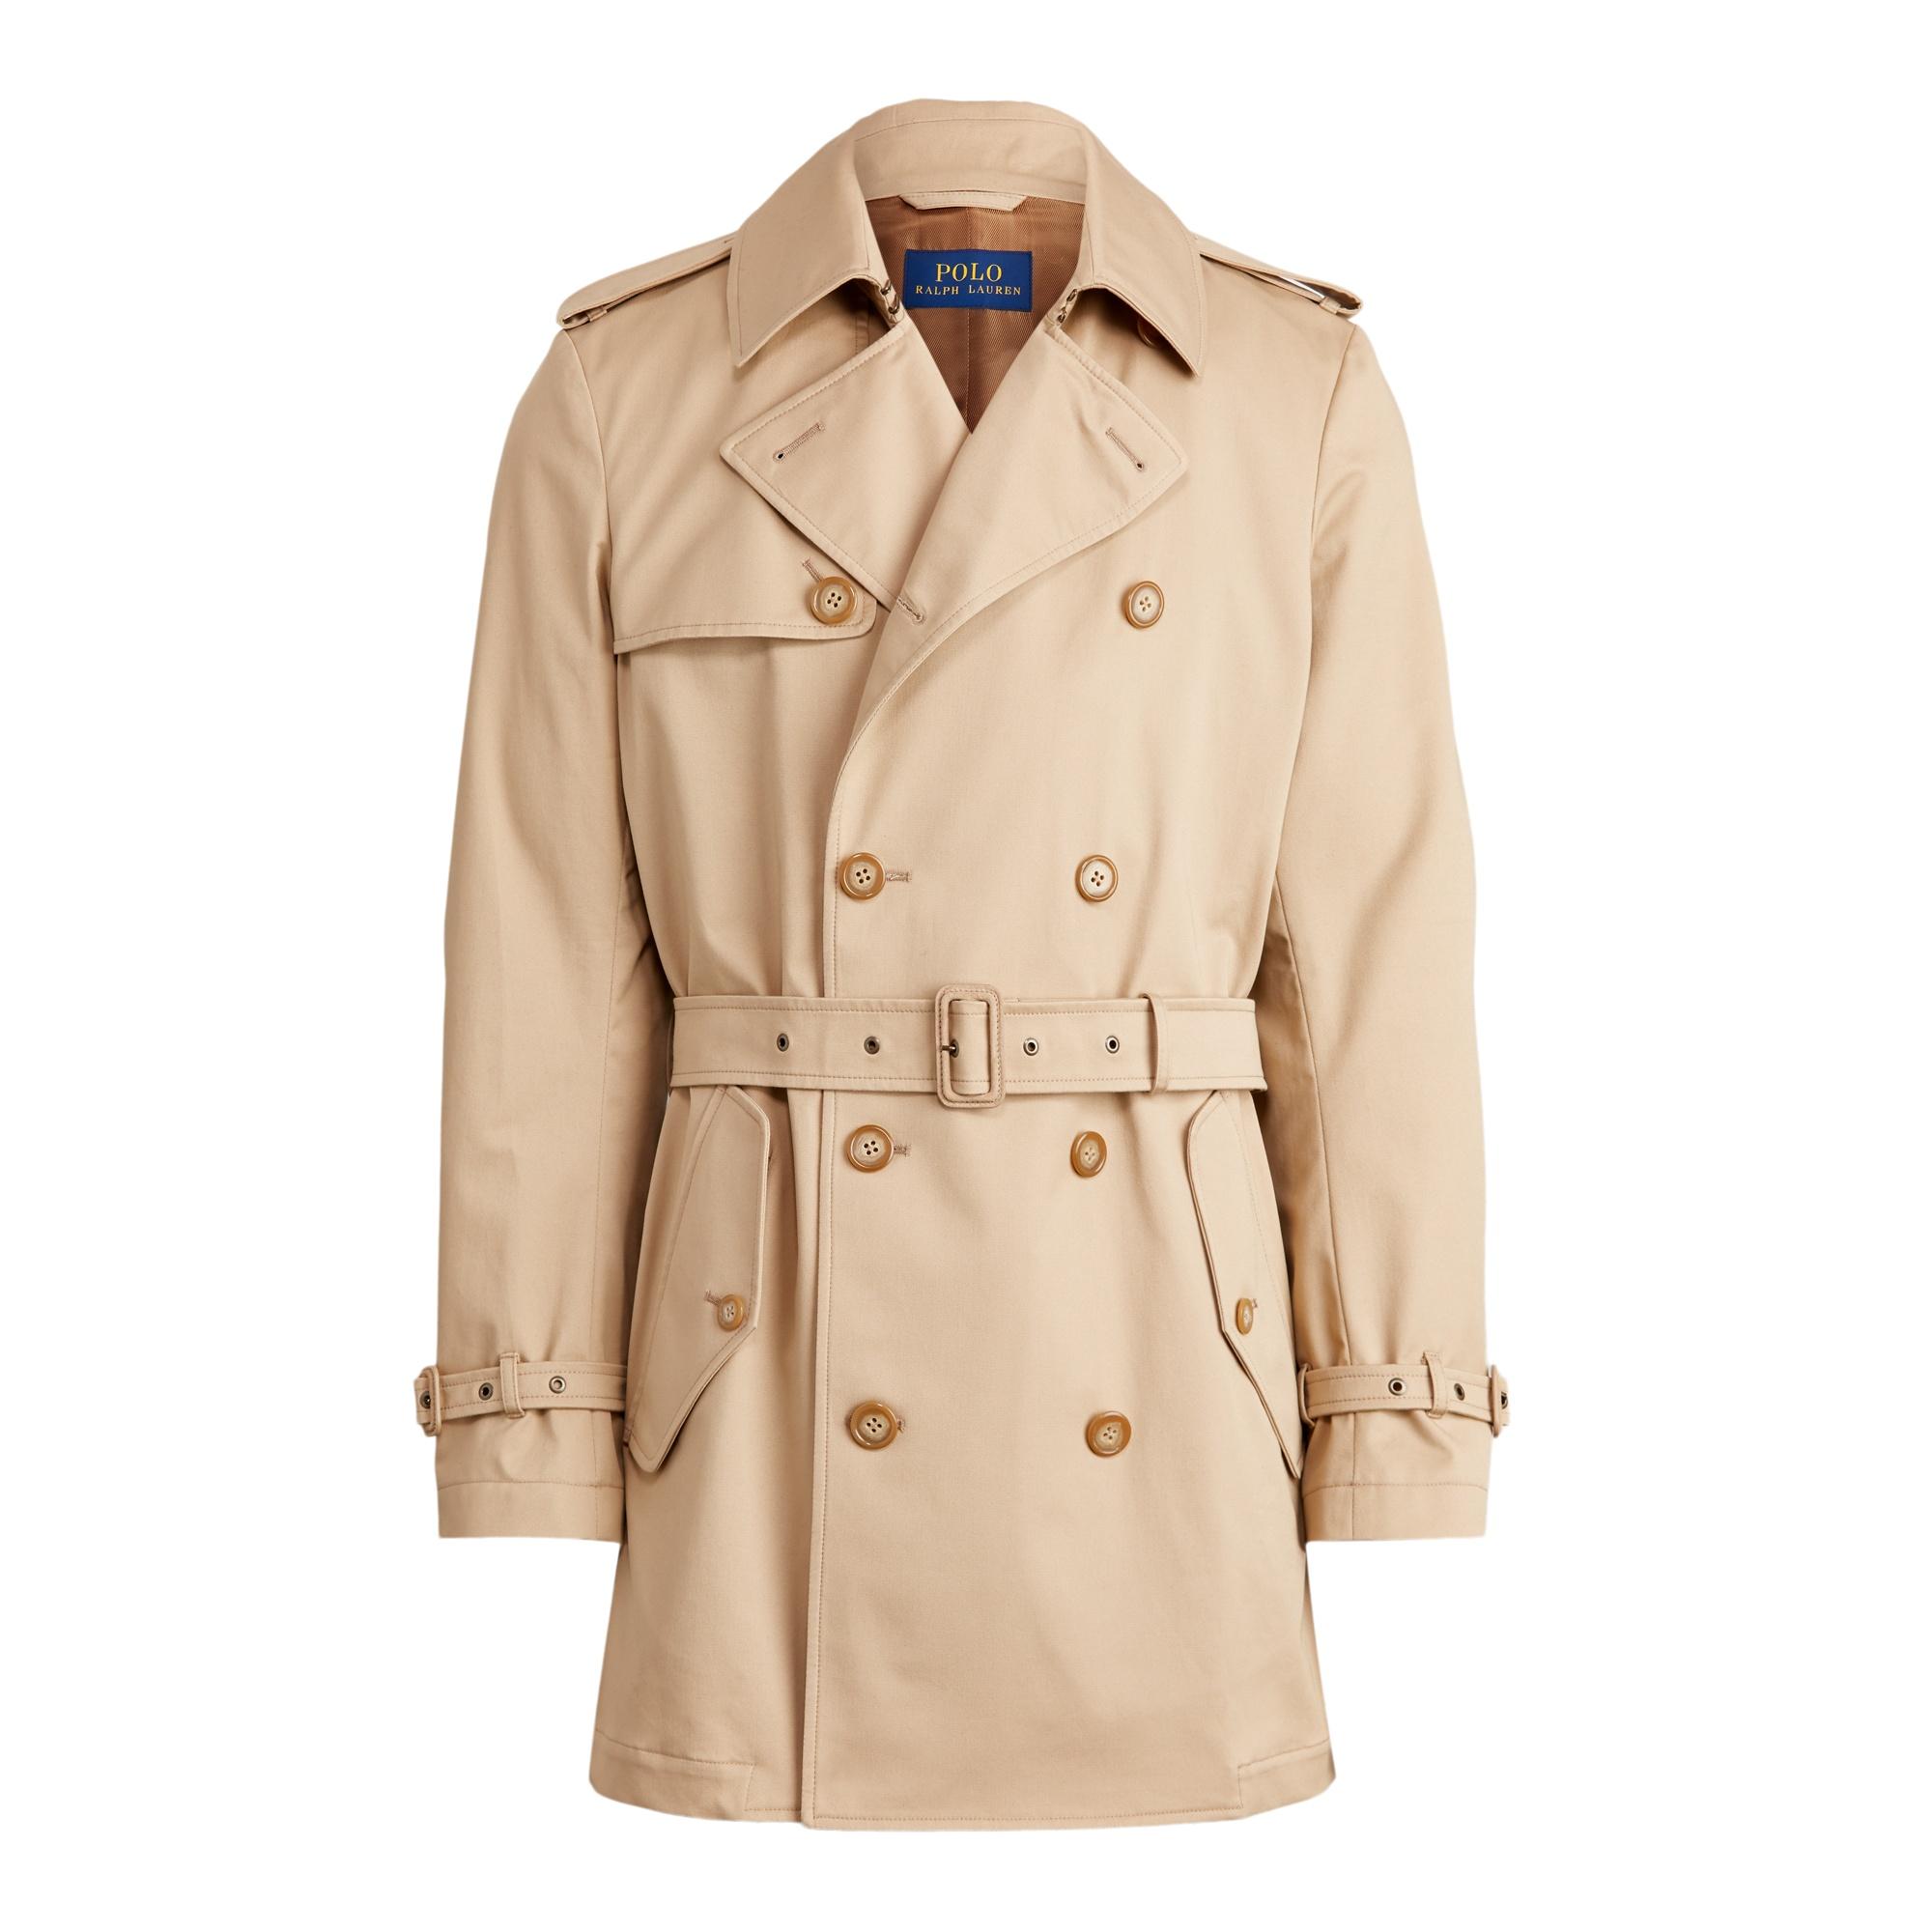 Ralph Lauren Cotton Stretch Chino Trench Coat in Natural for Men - Lyst